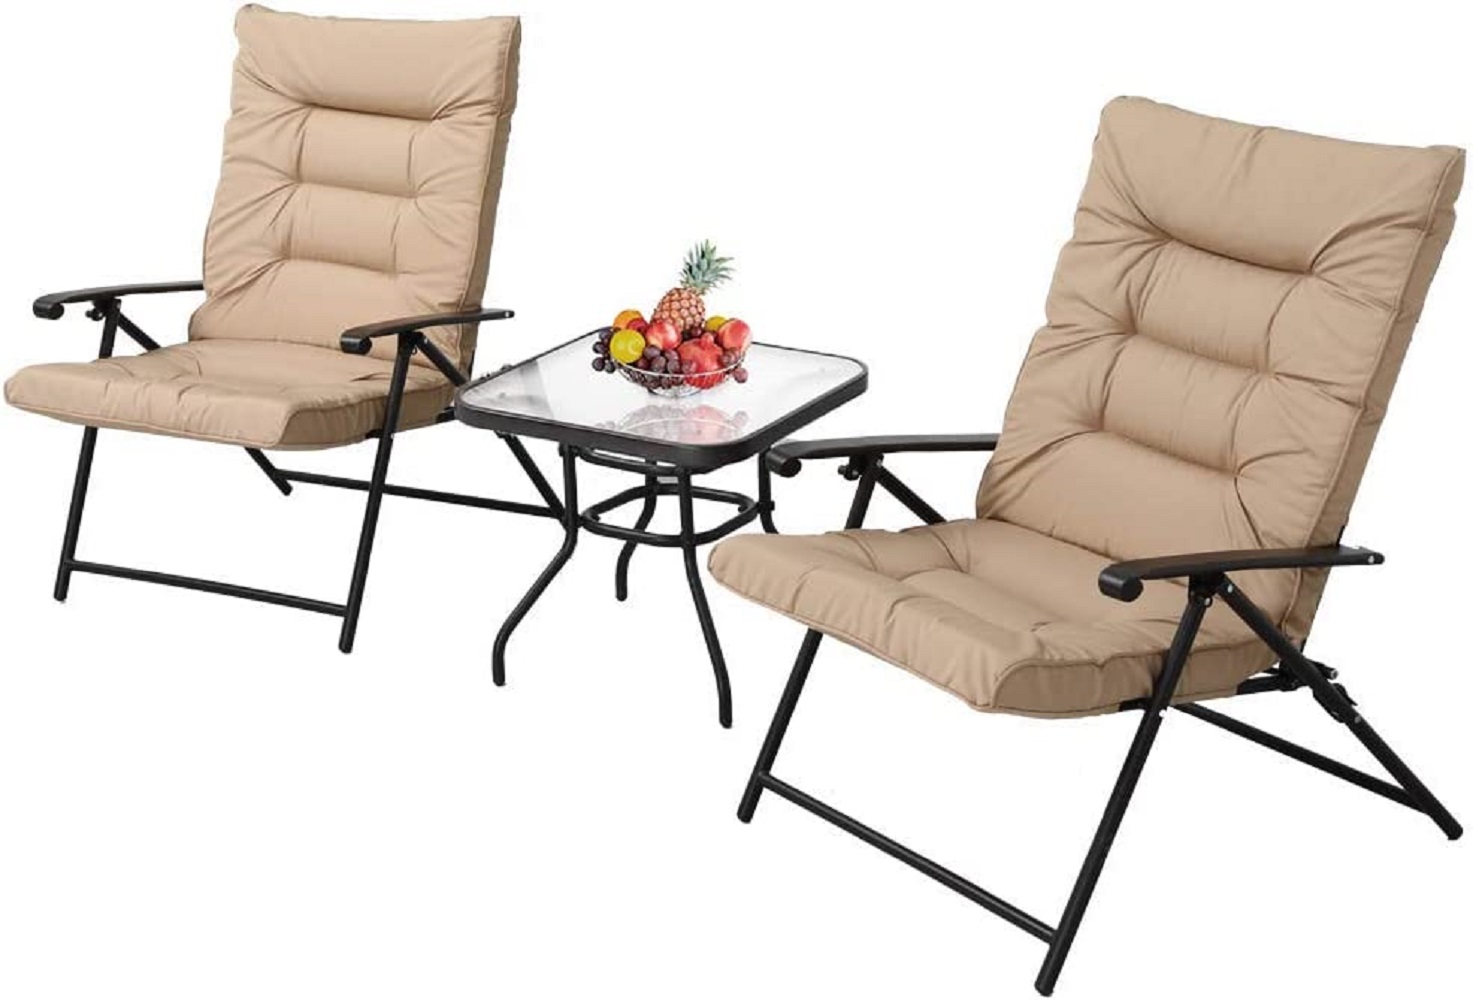 Suncrown Patio Padded Folding 3 Pieces Chair Set for 2 Adjustable Reclining Outdoor Furniture Metal Sling Chair with Coffee Table - image 2 of 6